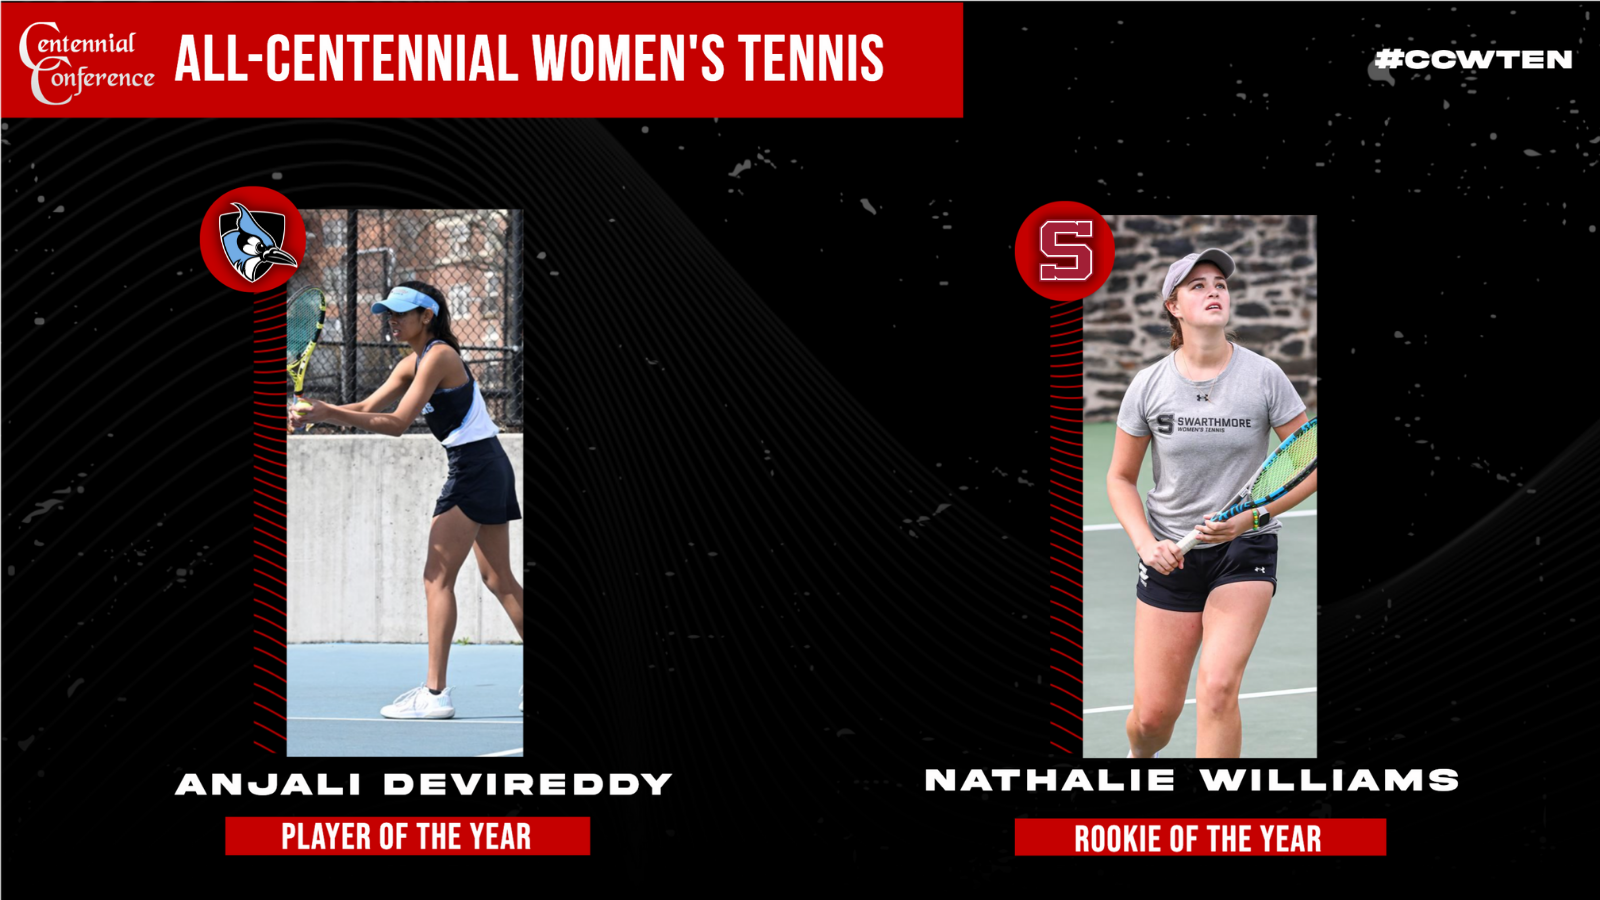 Anjali Devireddy Repeats as Player of the Year to Lead All-Centennial Women's Tennis Team